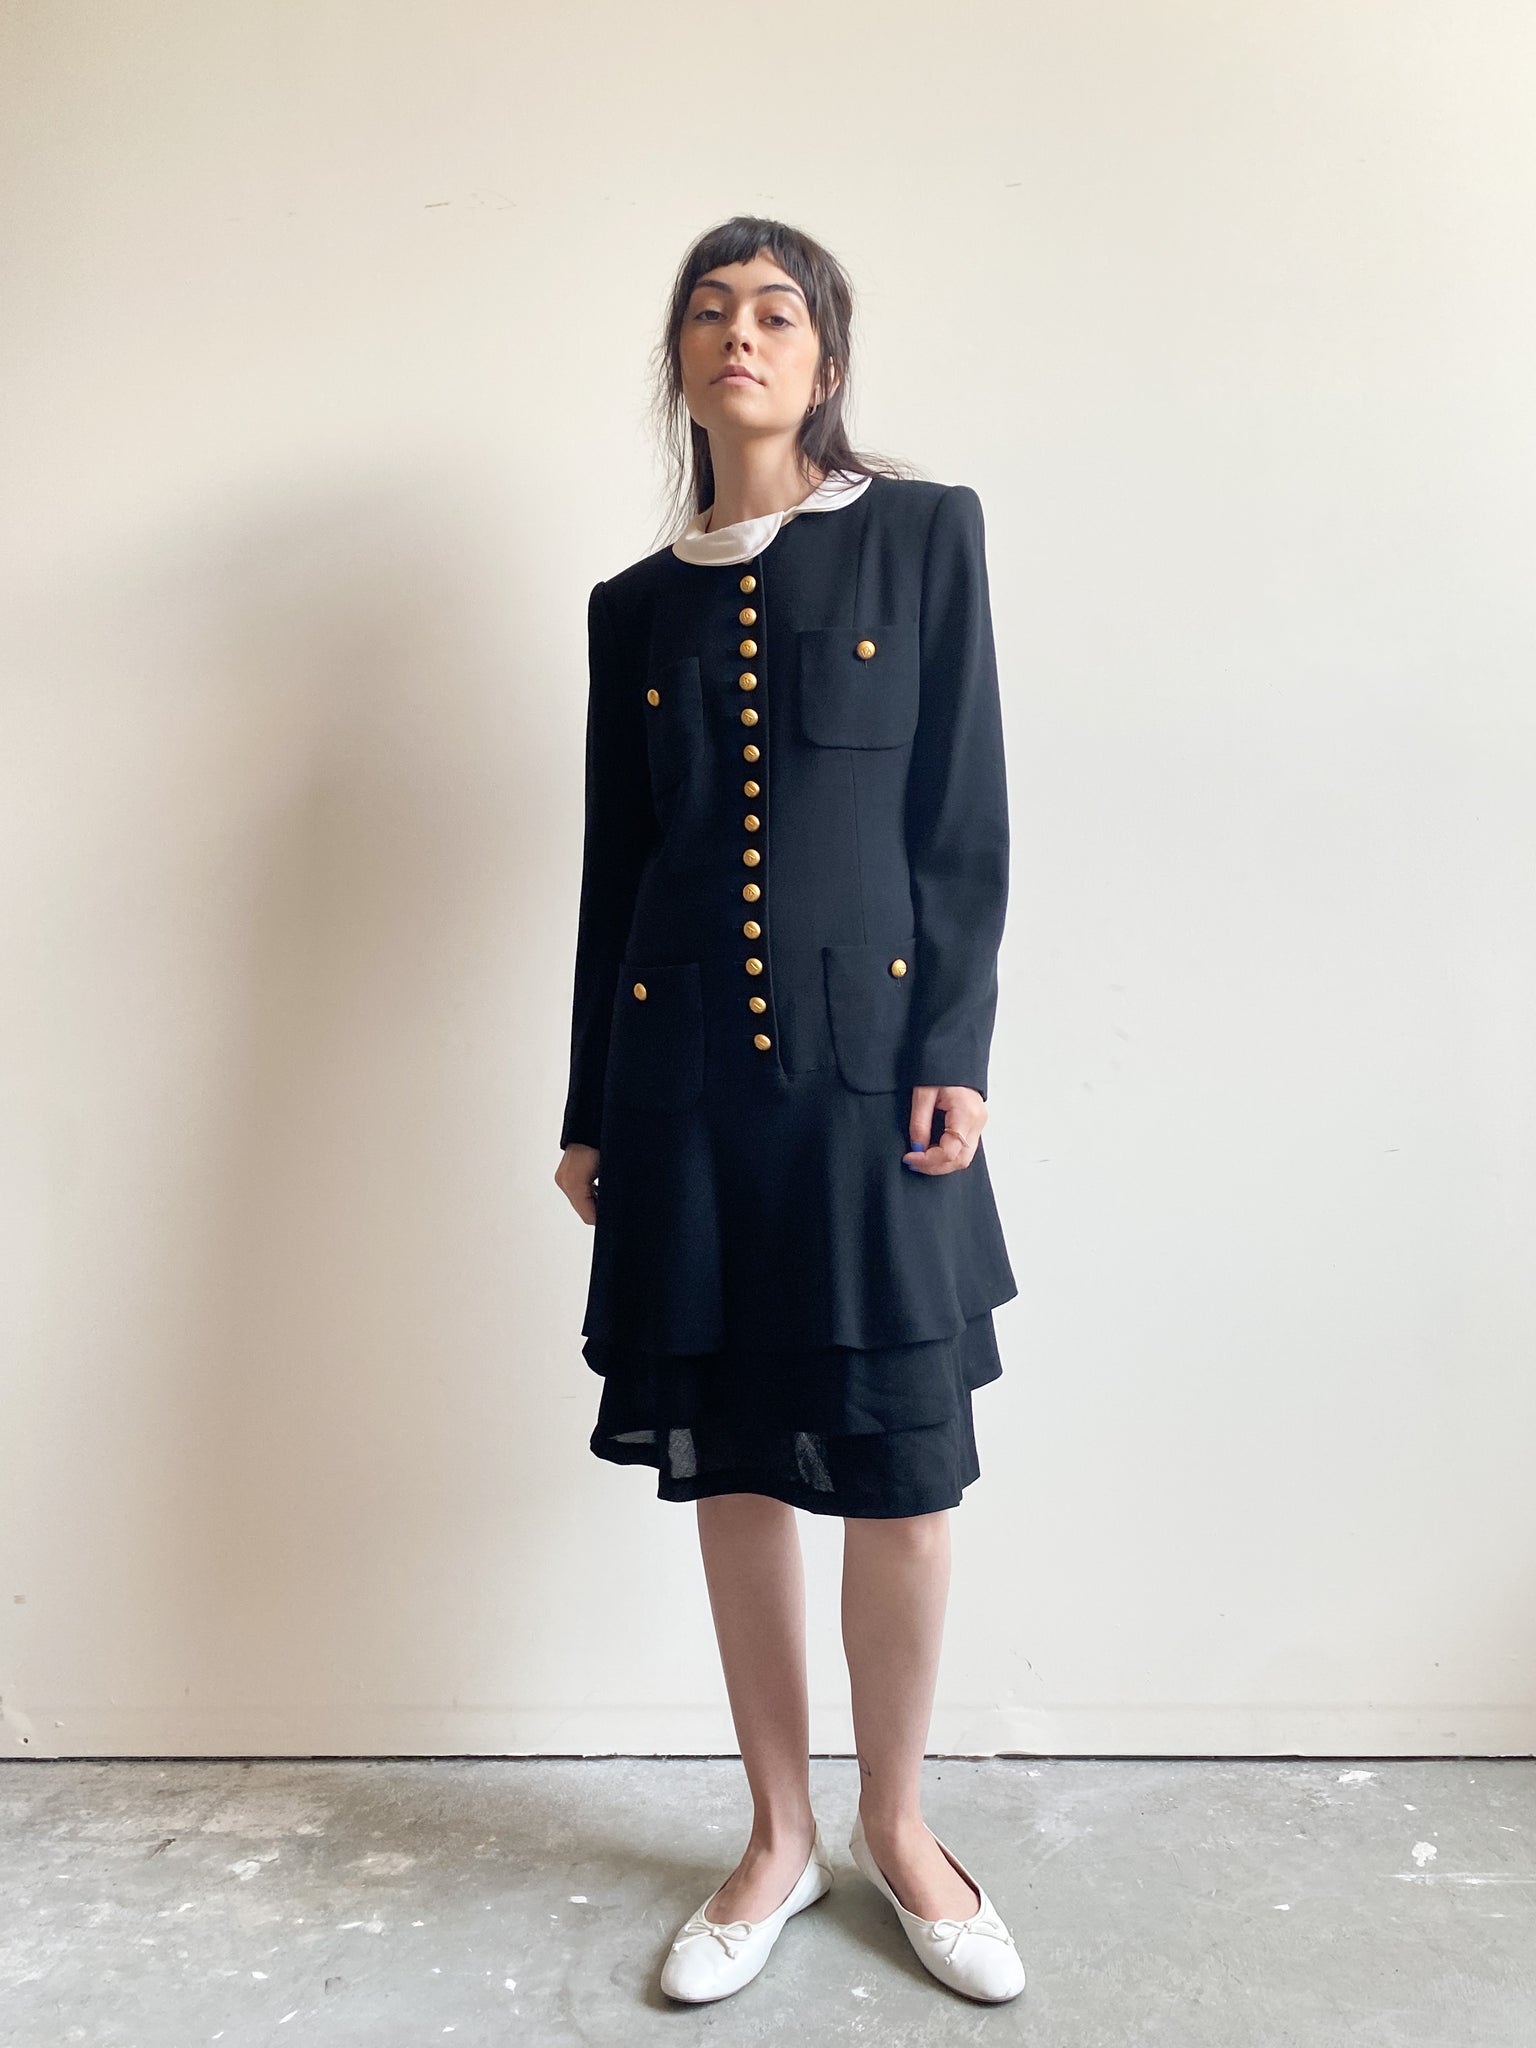 Vintage Rena Lange Wool & Silk Black Dress with White Collar and Gold Buttons (M)